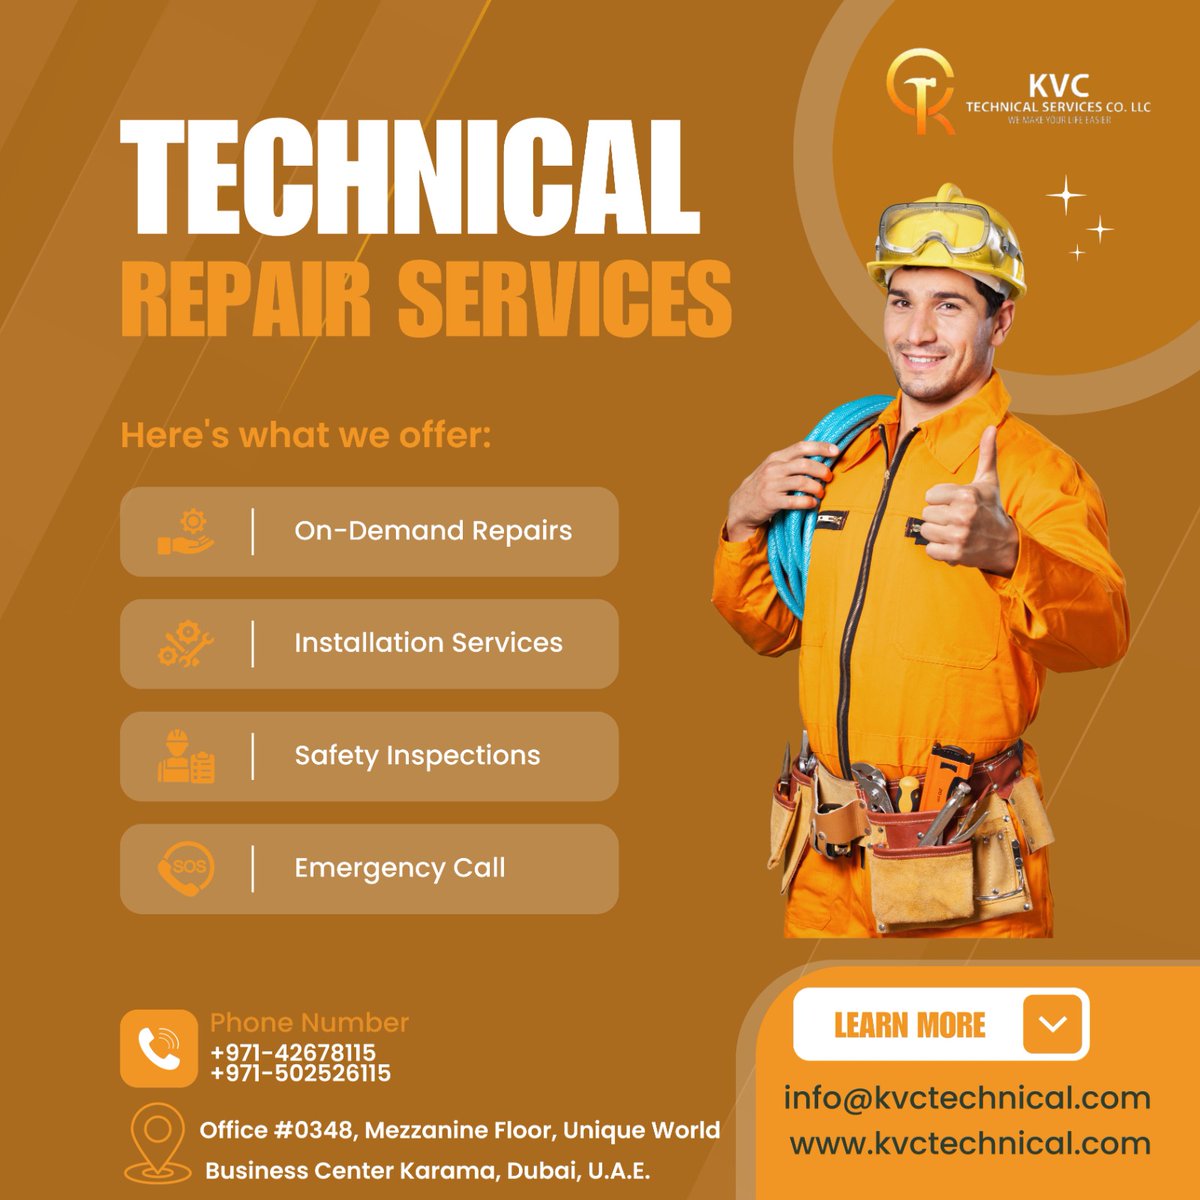 KVC Technical Services LLC offers comprehensive home maintenance services to help homeowners keep their properties in top condition.
☎️ +971 502526115
🌐: kvctechnical.com
💬: wa.link/2m65ui
#homemaintenance #ACservices #bestelectricalwork #Dubai #handymanServices